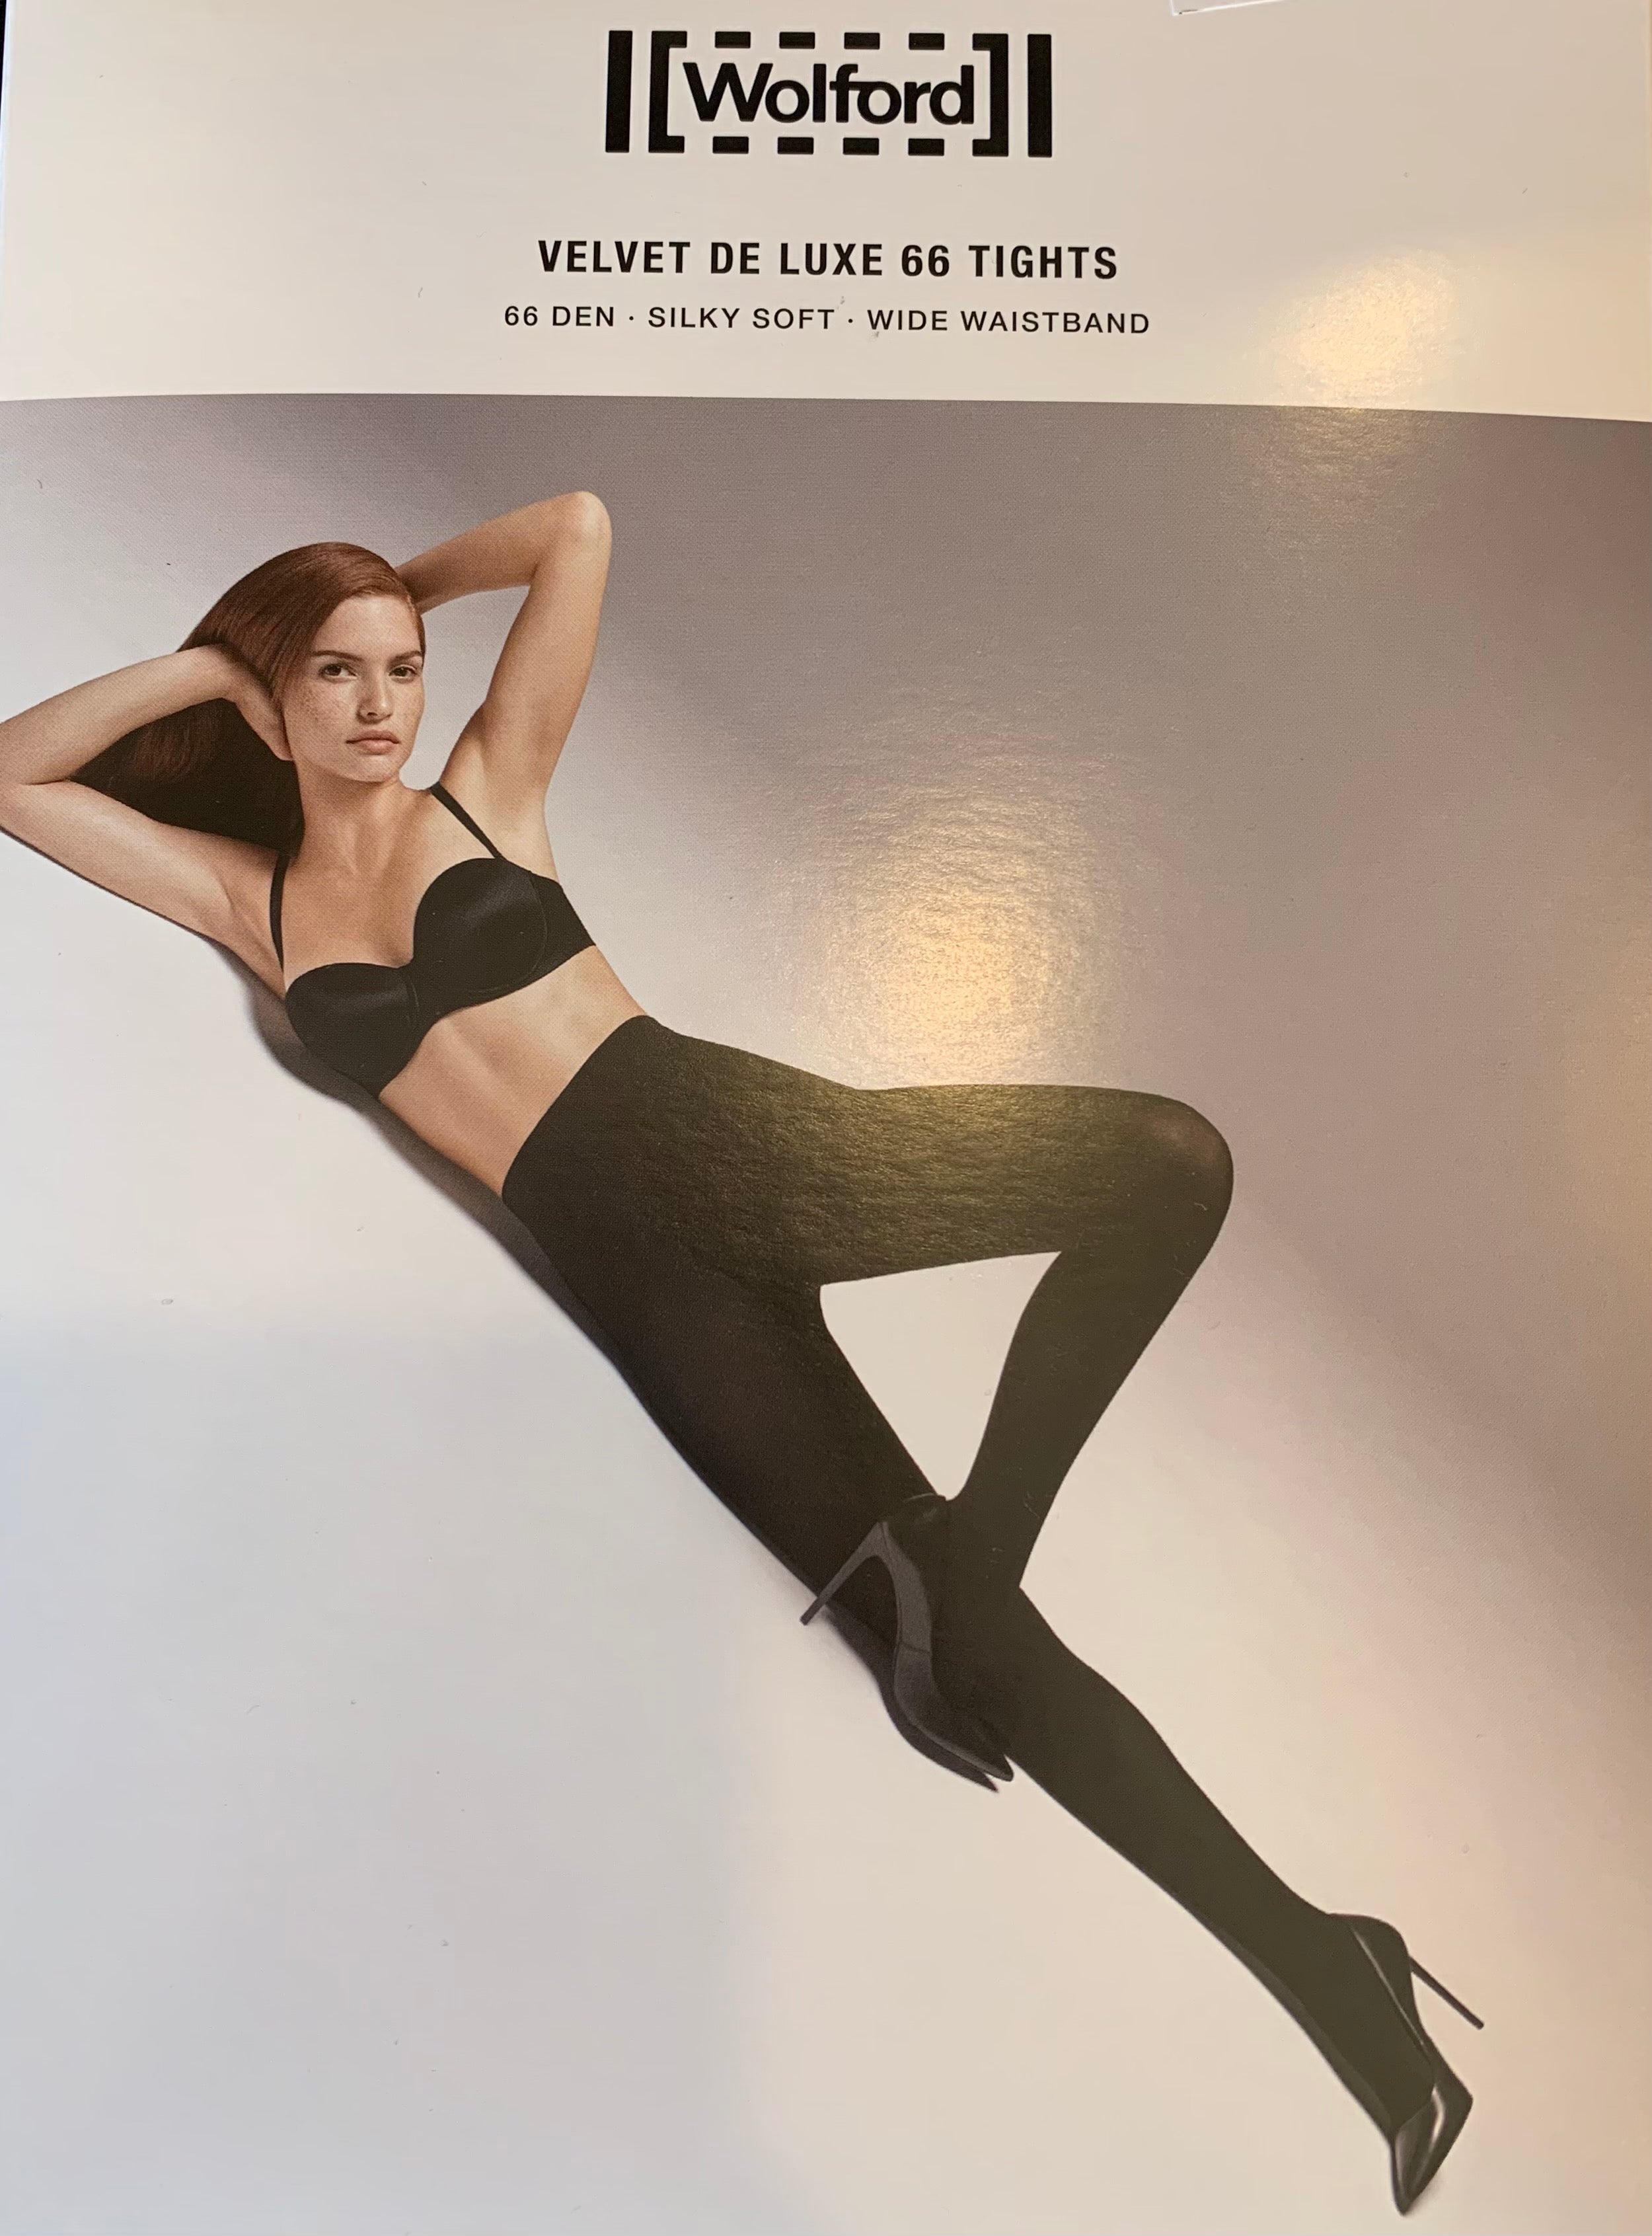 Wolford Velvet De Luxe 66 Tights 14775 – From Head To Hose